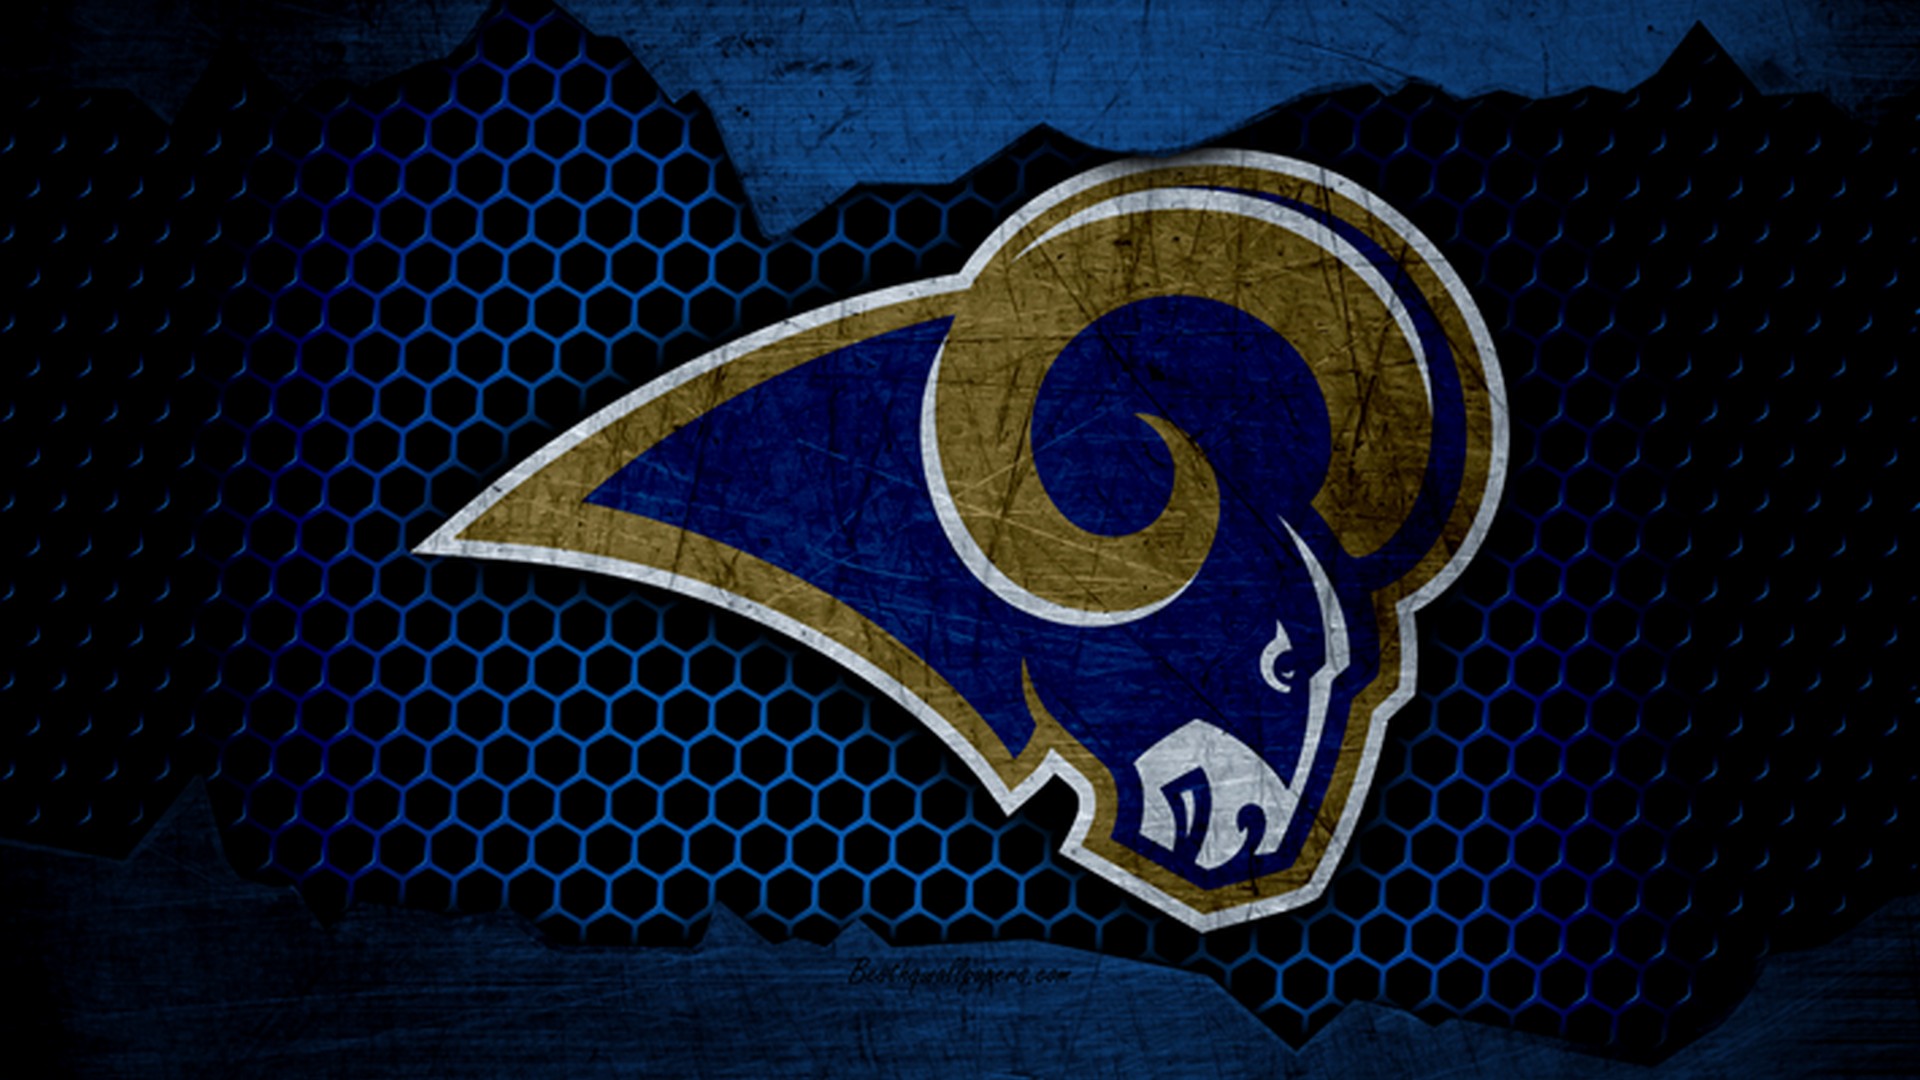 HD Backgrounds Los Angeles Rams with resolution 1920x1080 pixel. You can make this wallpaper for your Mac or Windows Desktop Background, iPhone, Android or Tablet and another Smartphone device